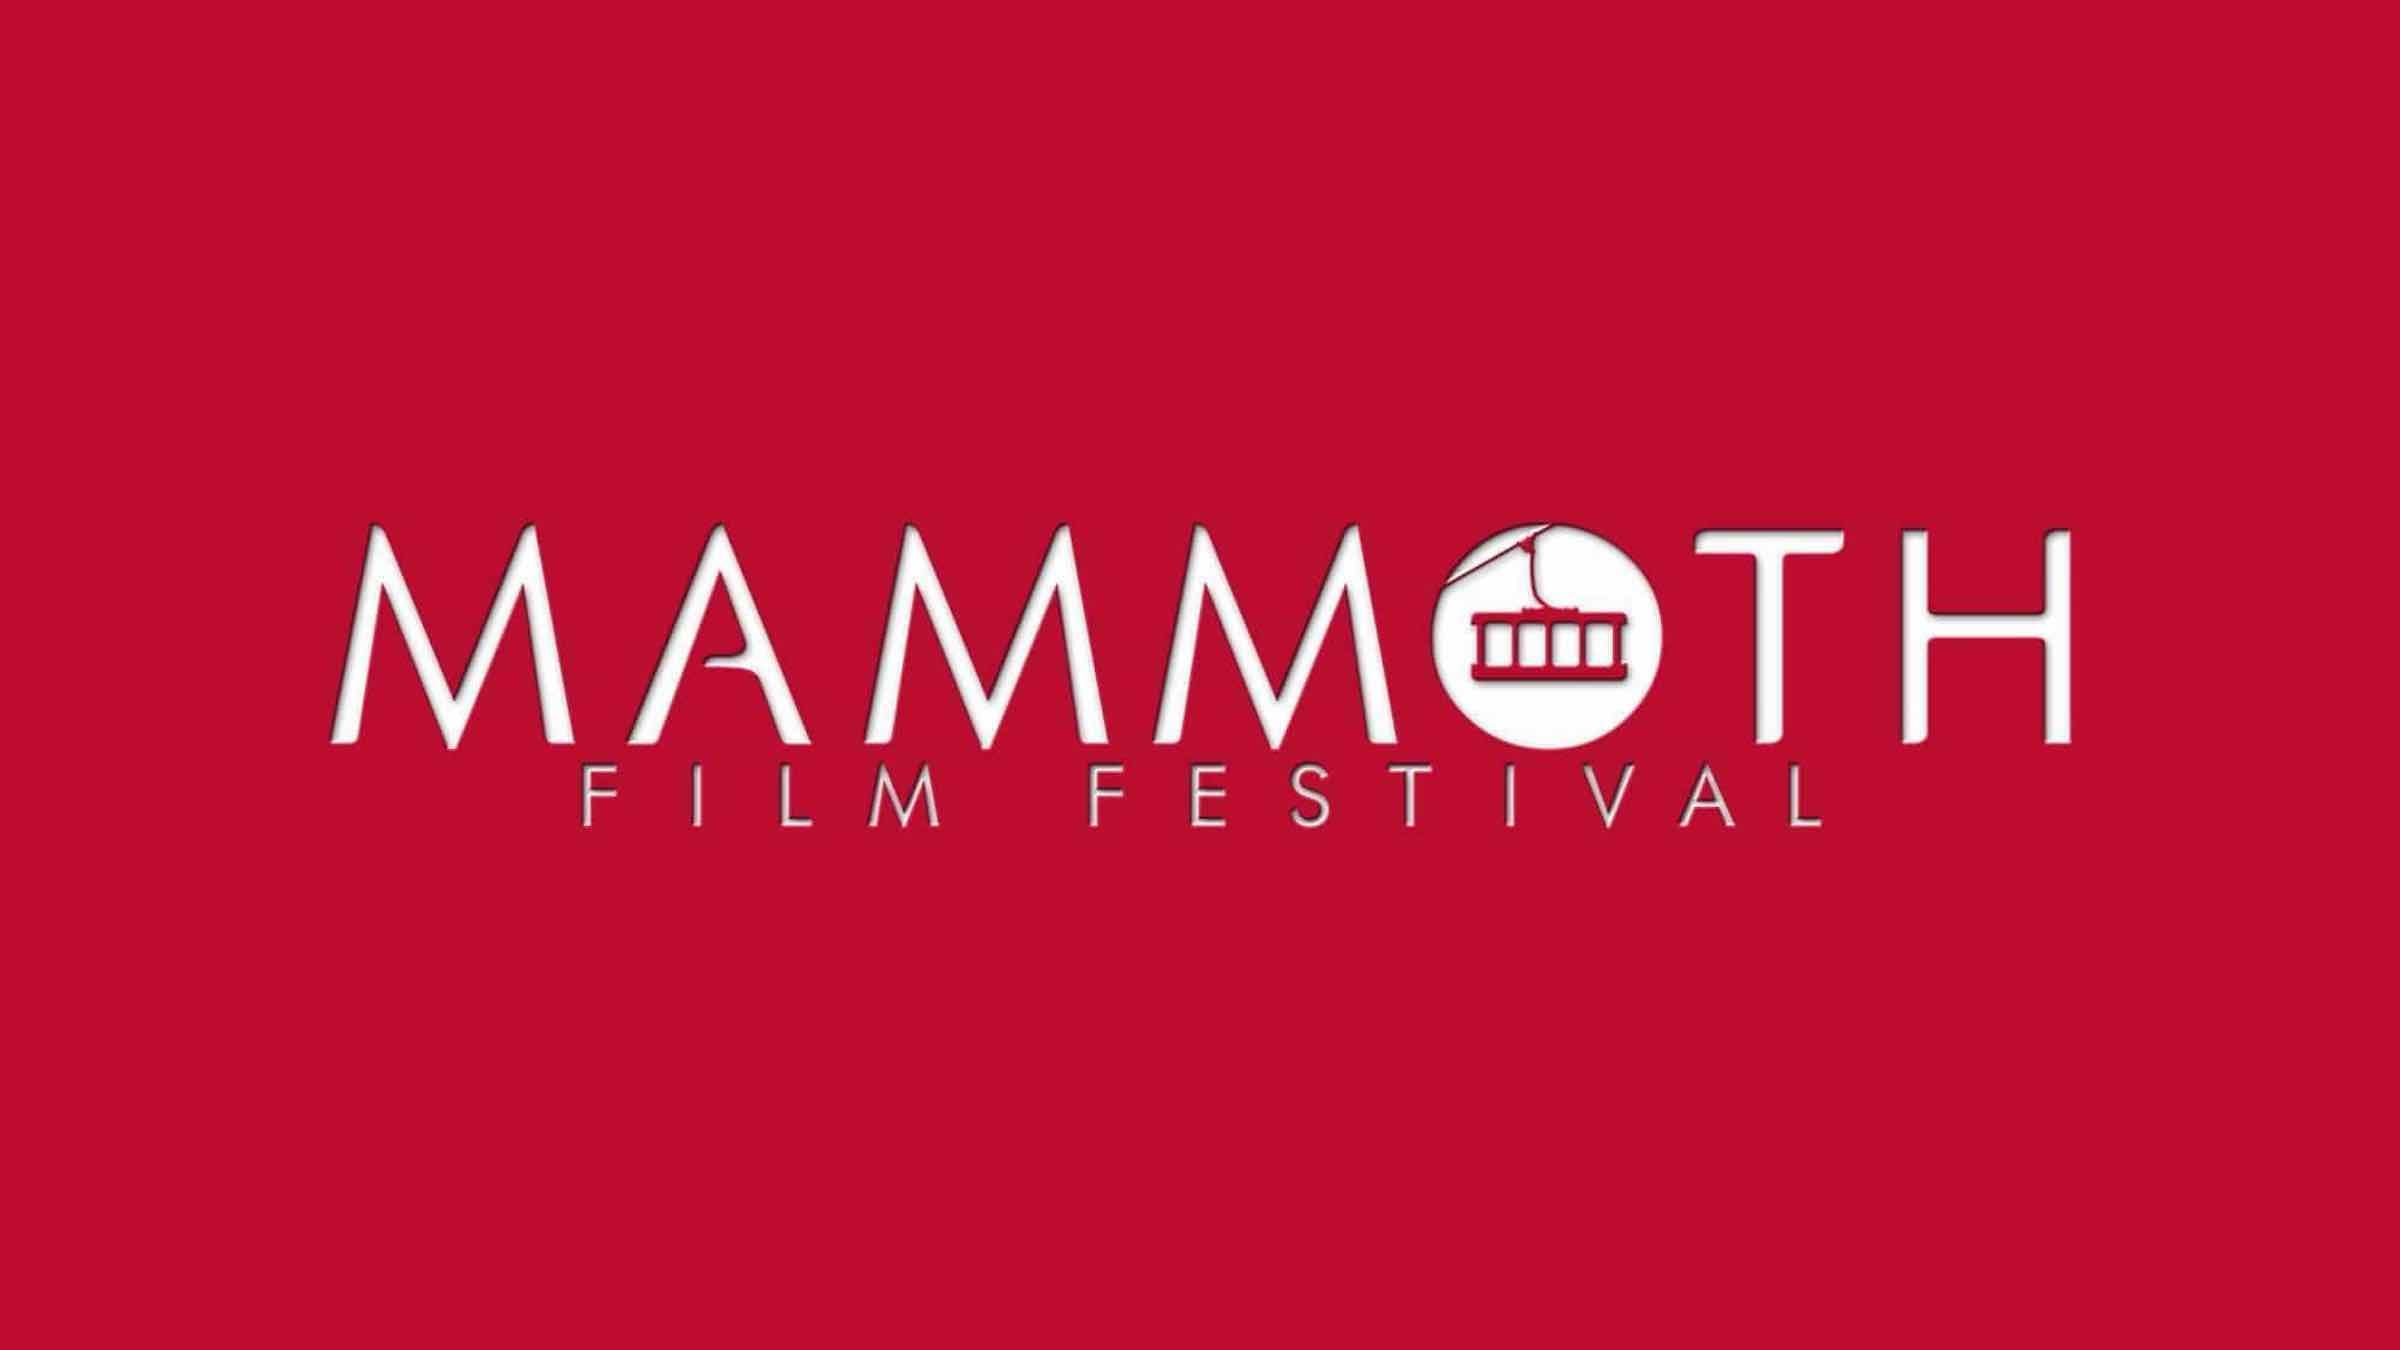 The Mammoth Film Festival is promising to be one of the biggest film events of the year. Here's what you need to know about the biggest new film festival.